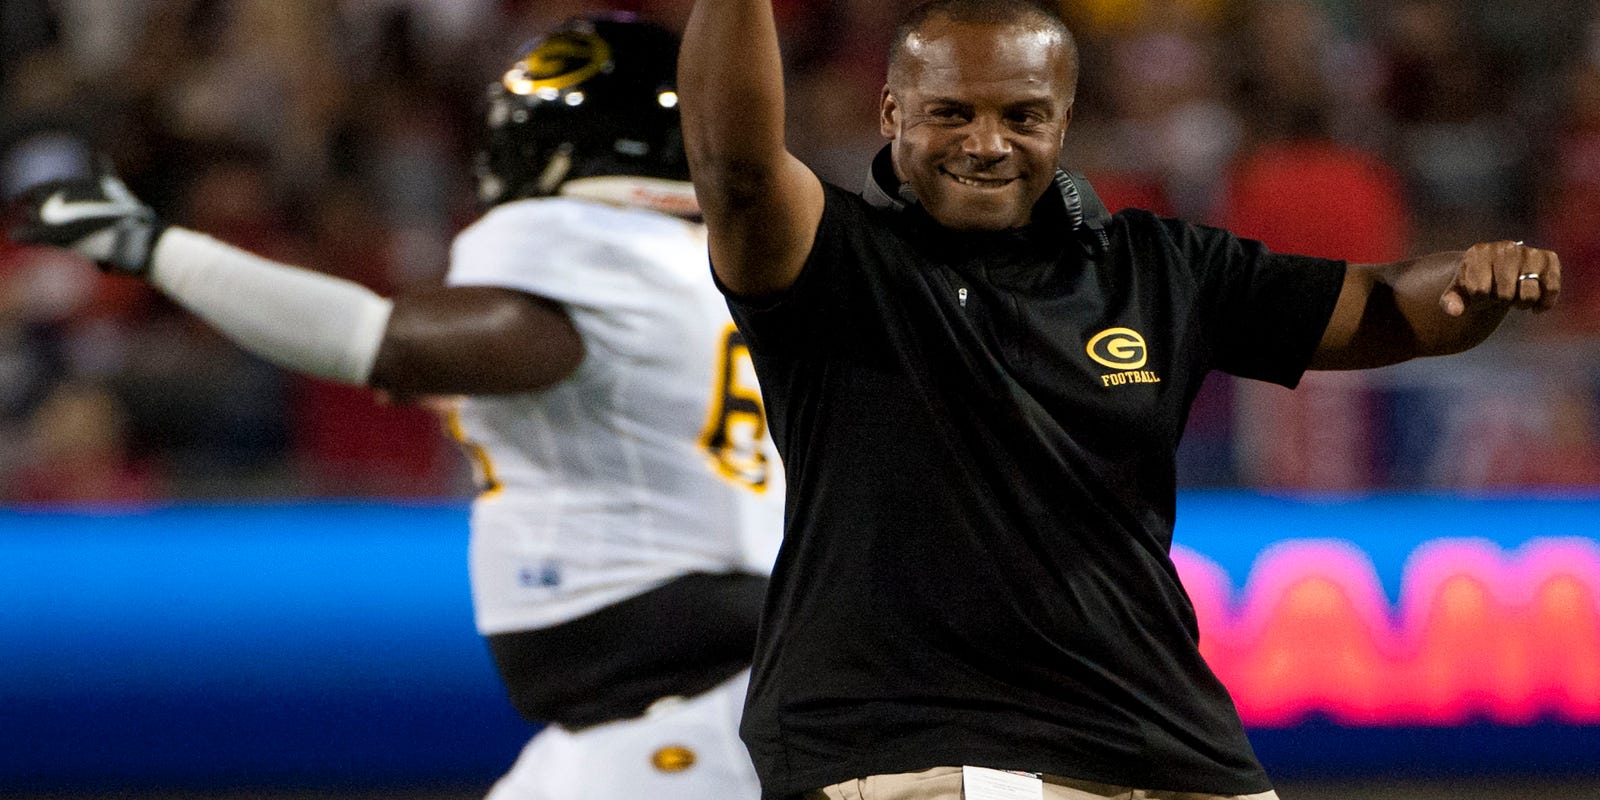 How Broderick Fobbs New Deal With Grambling State Stacks Up